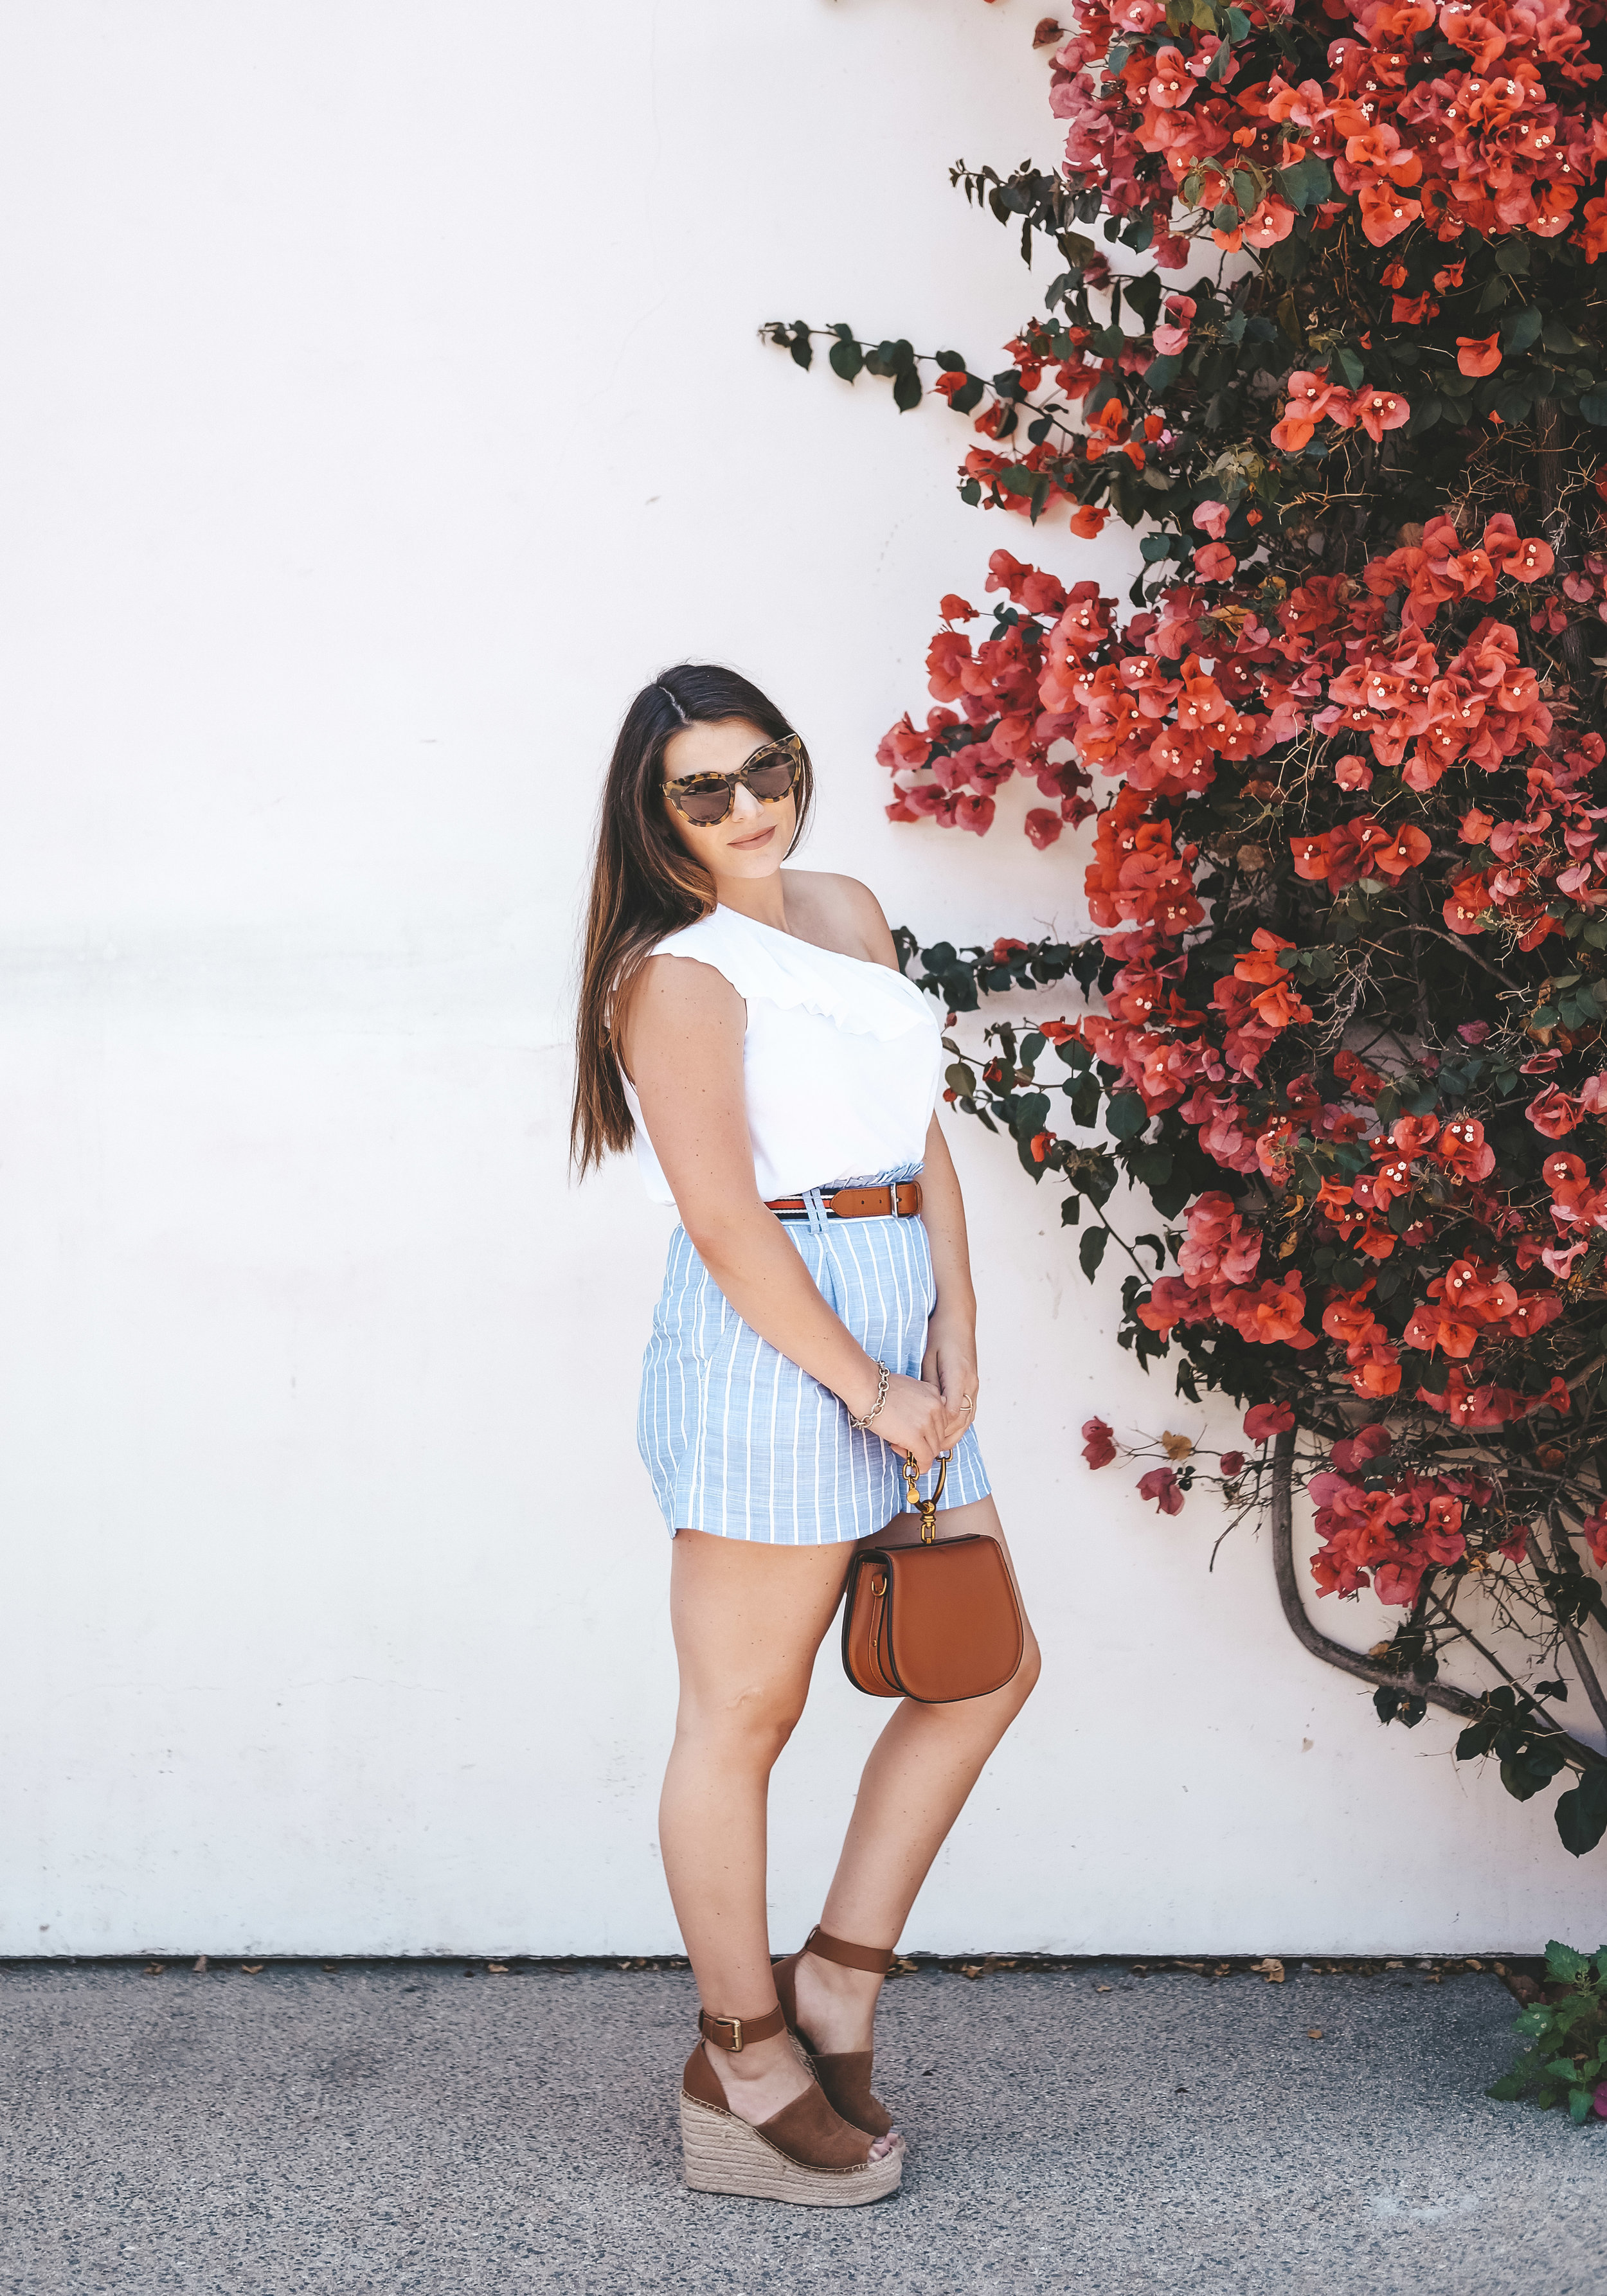 FOURTH OF JULY OUTFITS FROM THE SHOPS AT MISSION VIEJO